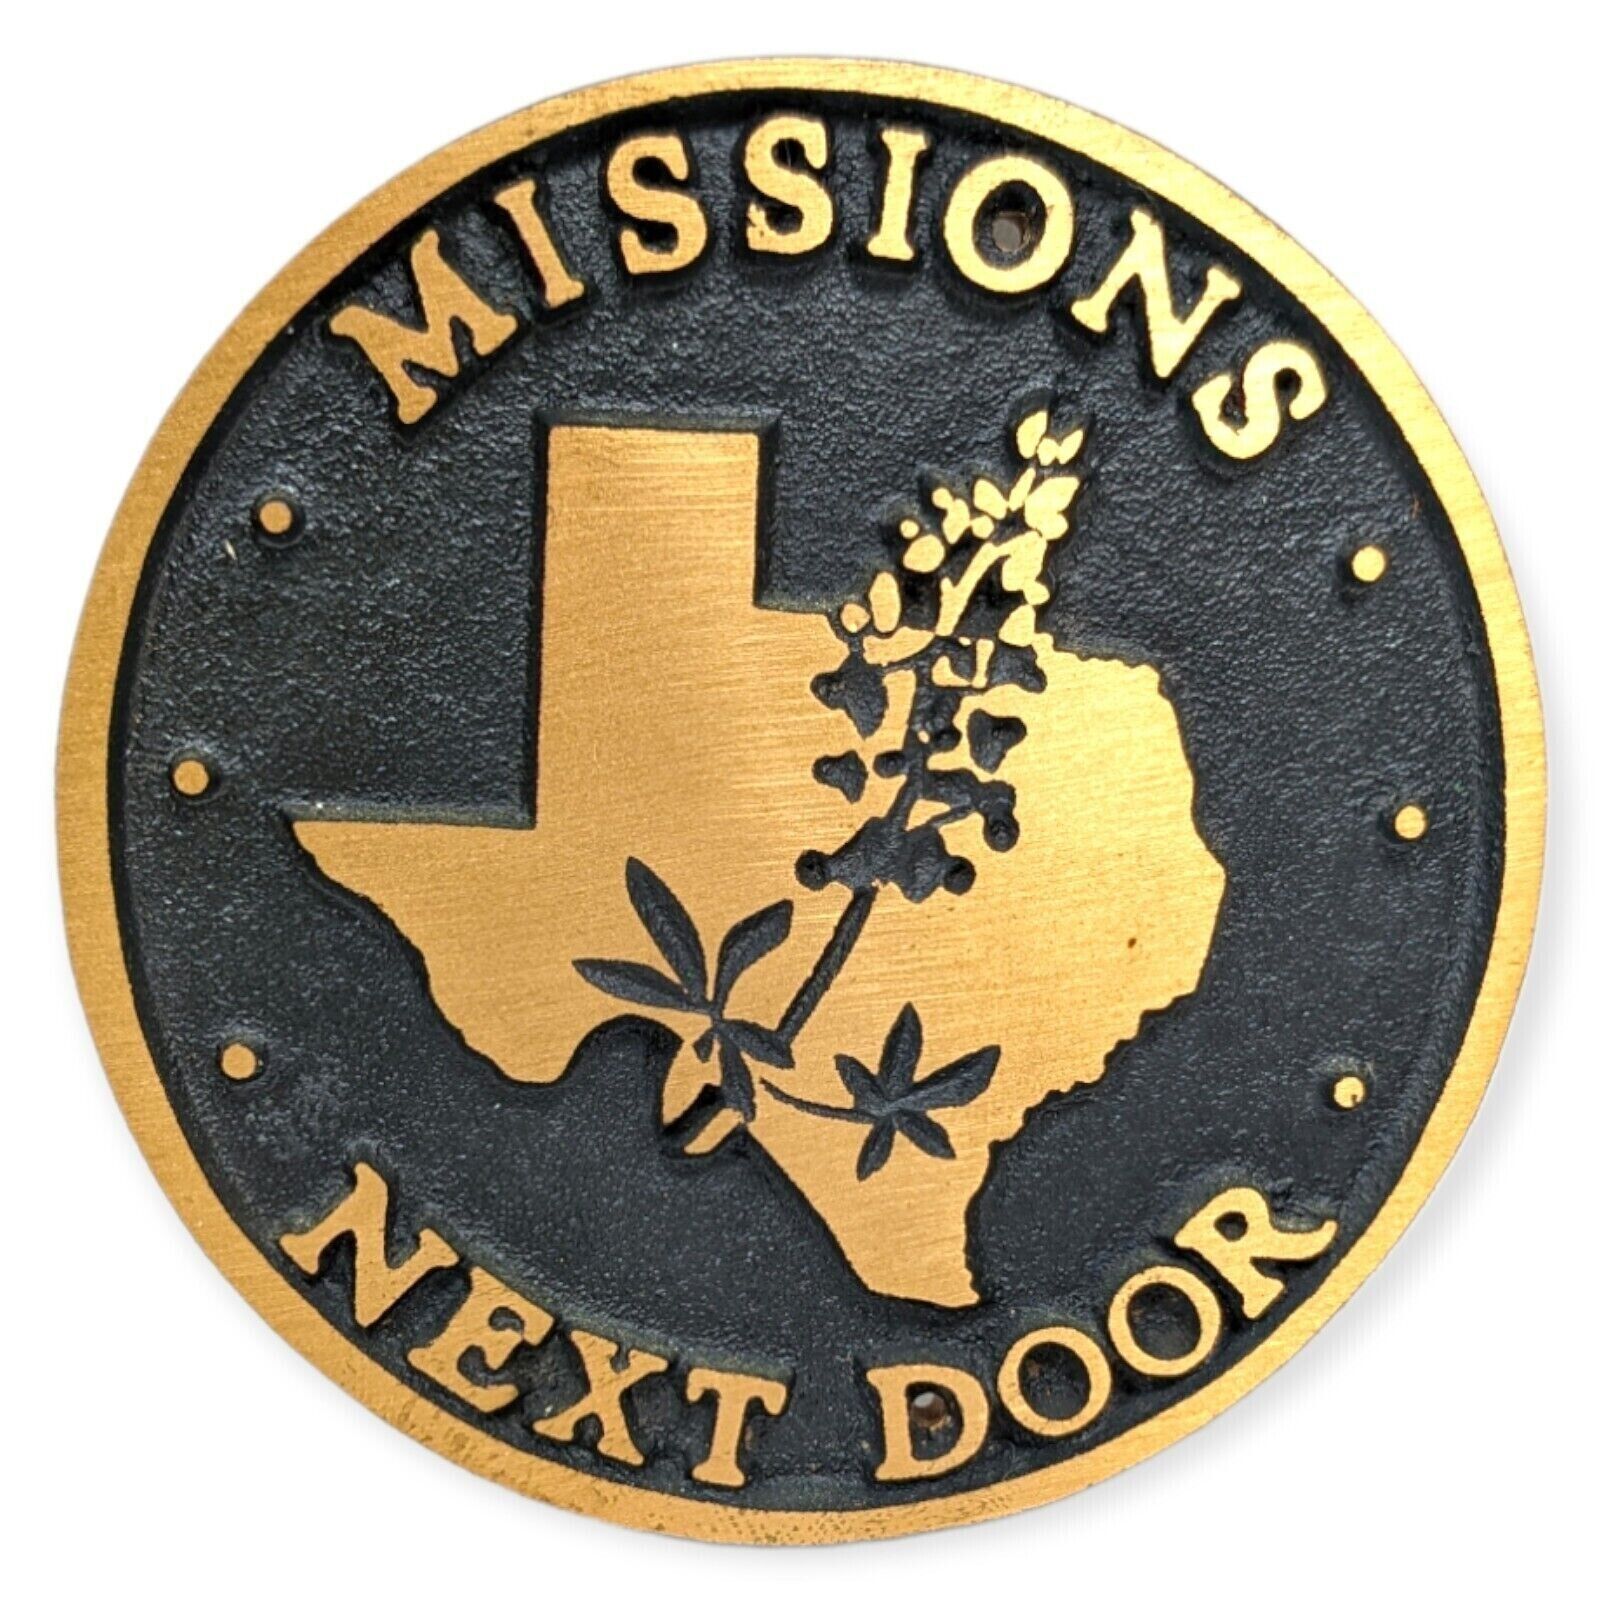 Missions Next Door Bronze Wall Plaque Medal Texas Christian House Medal Vintage